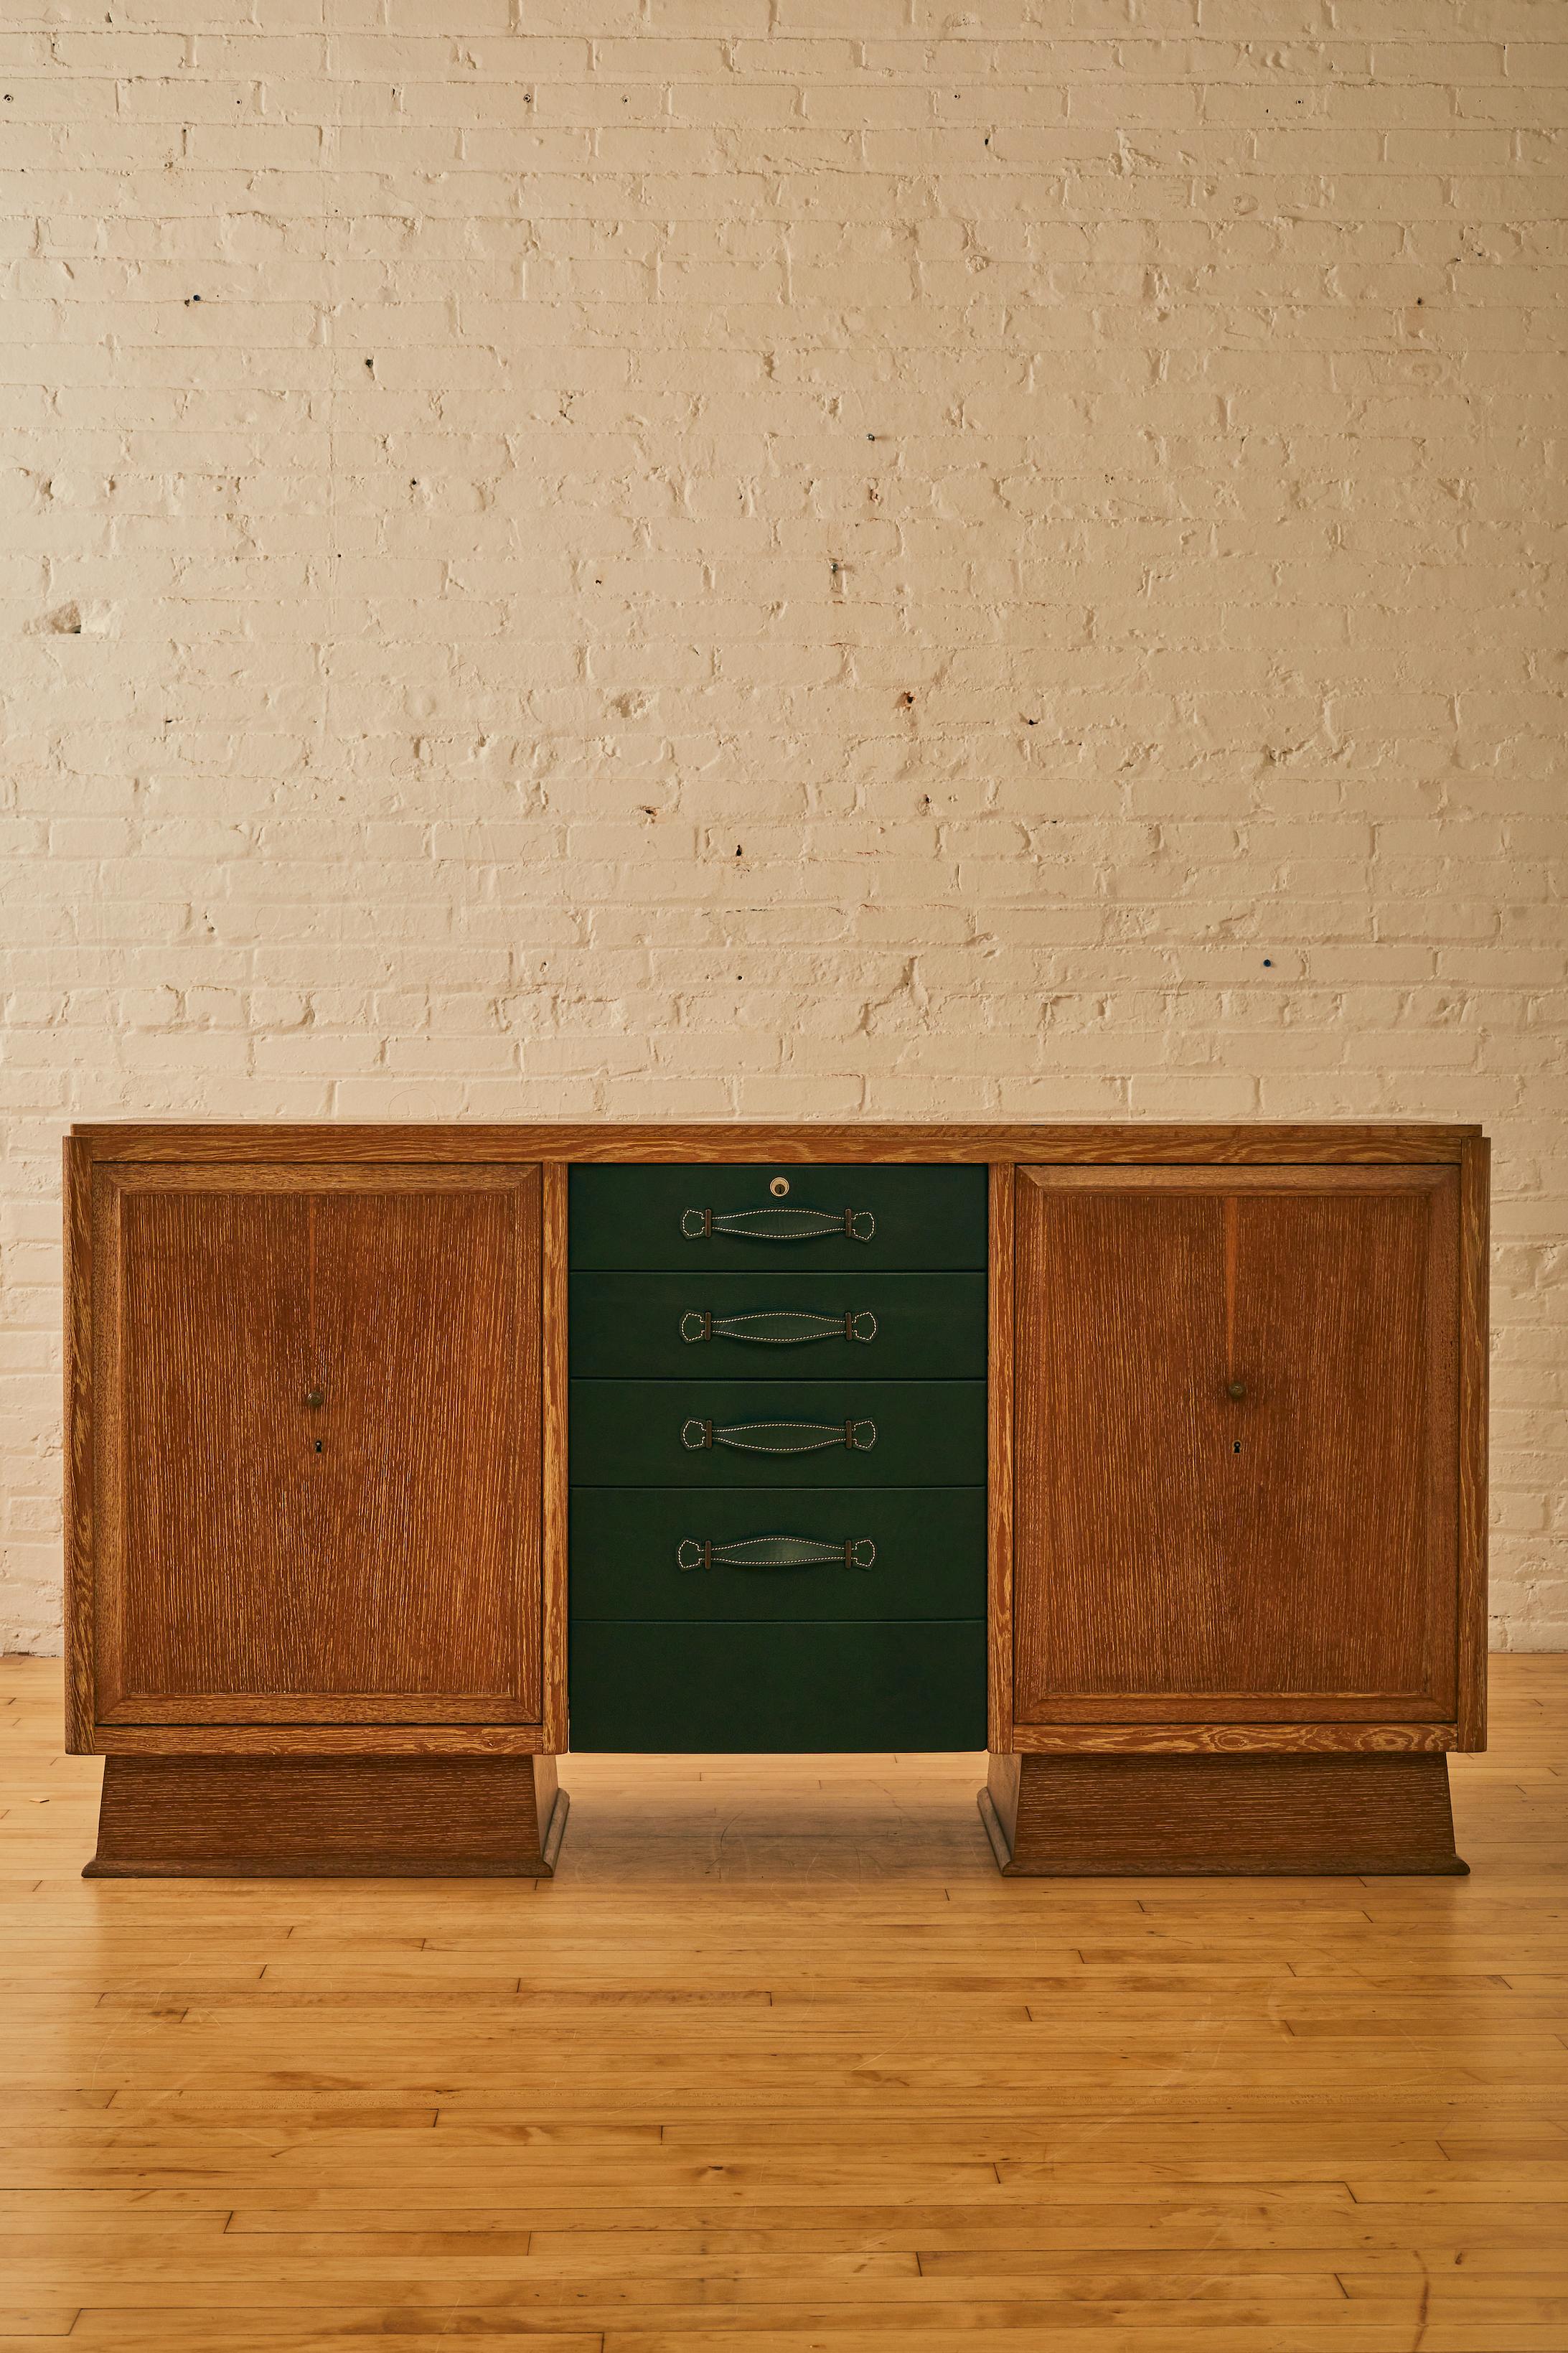 Cerused Oak and Leather Sideboard by Maurice Pre.

